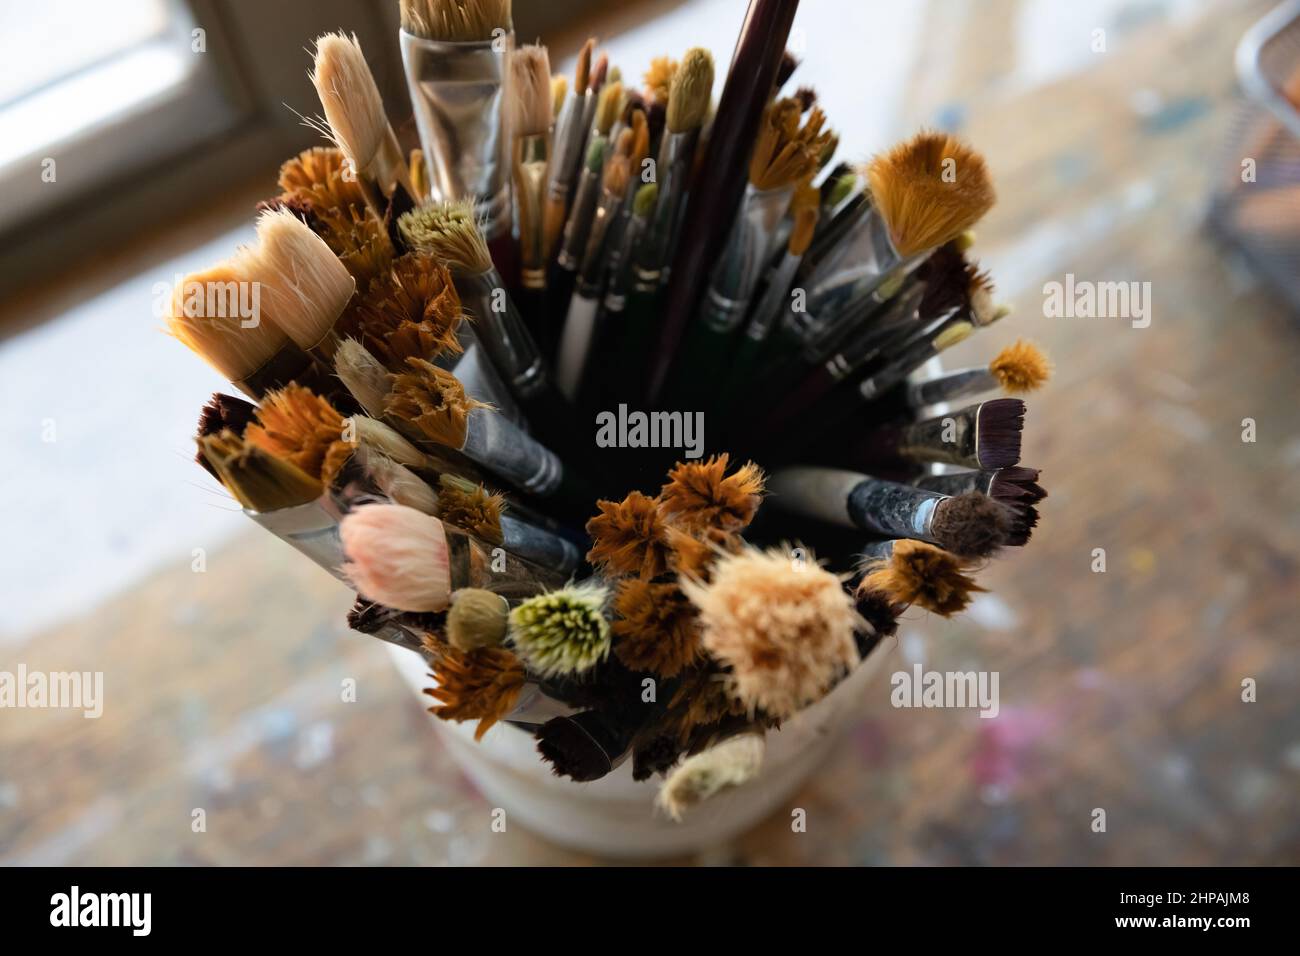 Top close up view on focus on paintbrushes in organizer. Stock Photo